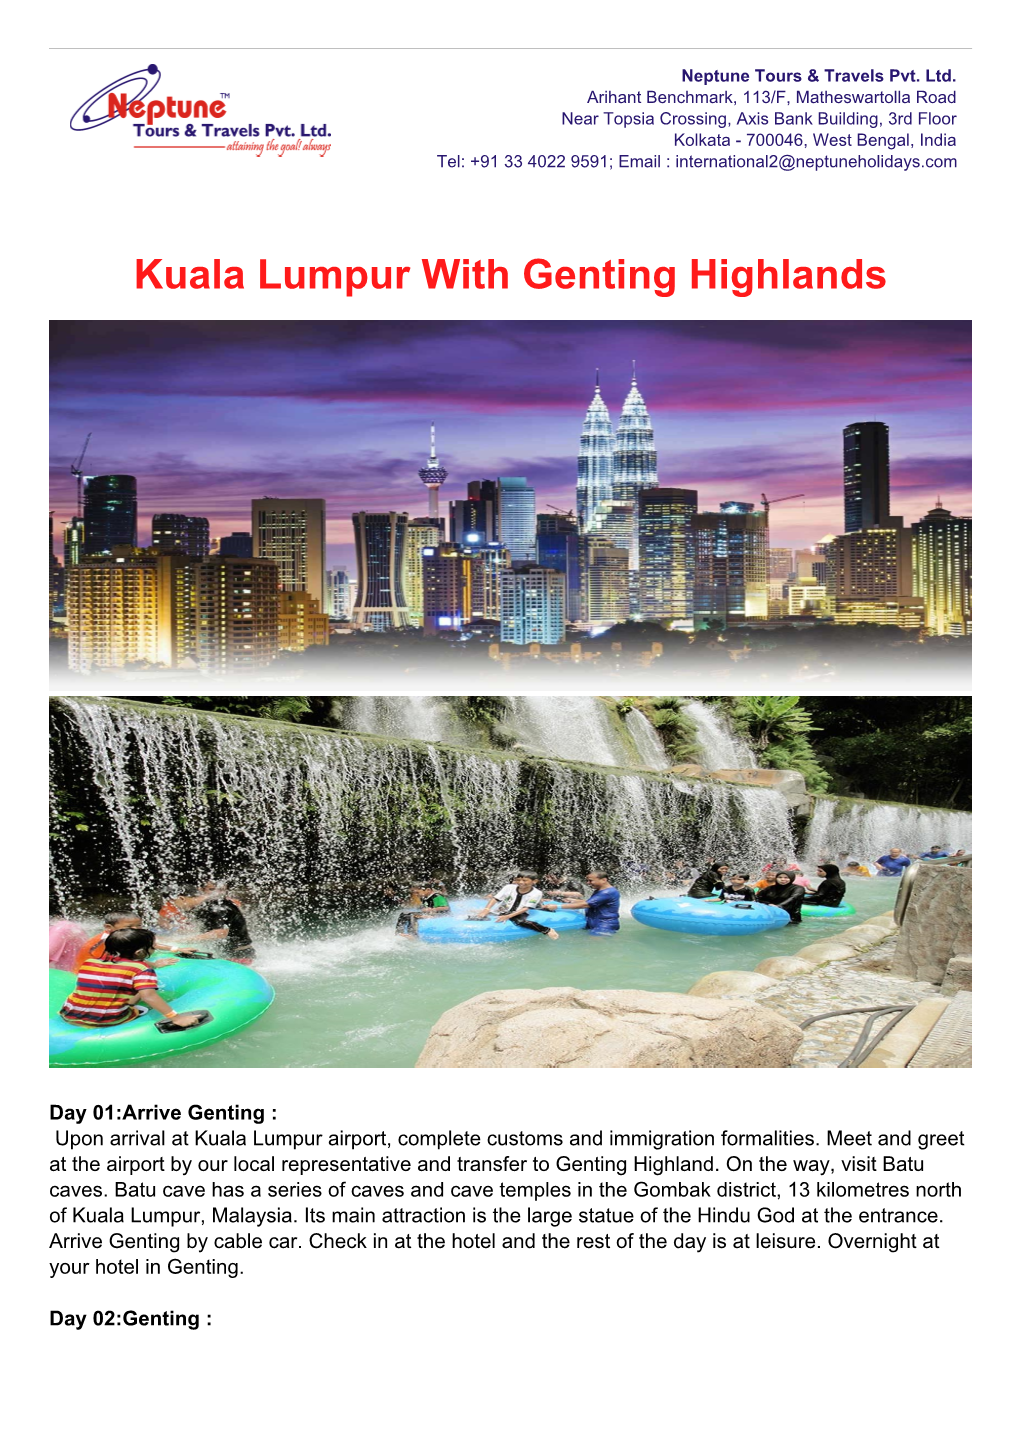 Kuala Lumpur with Genting Highlands